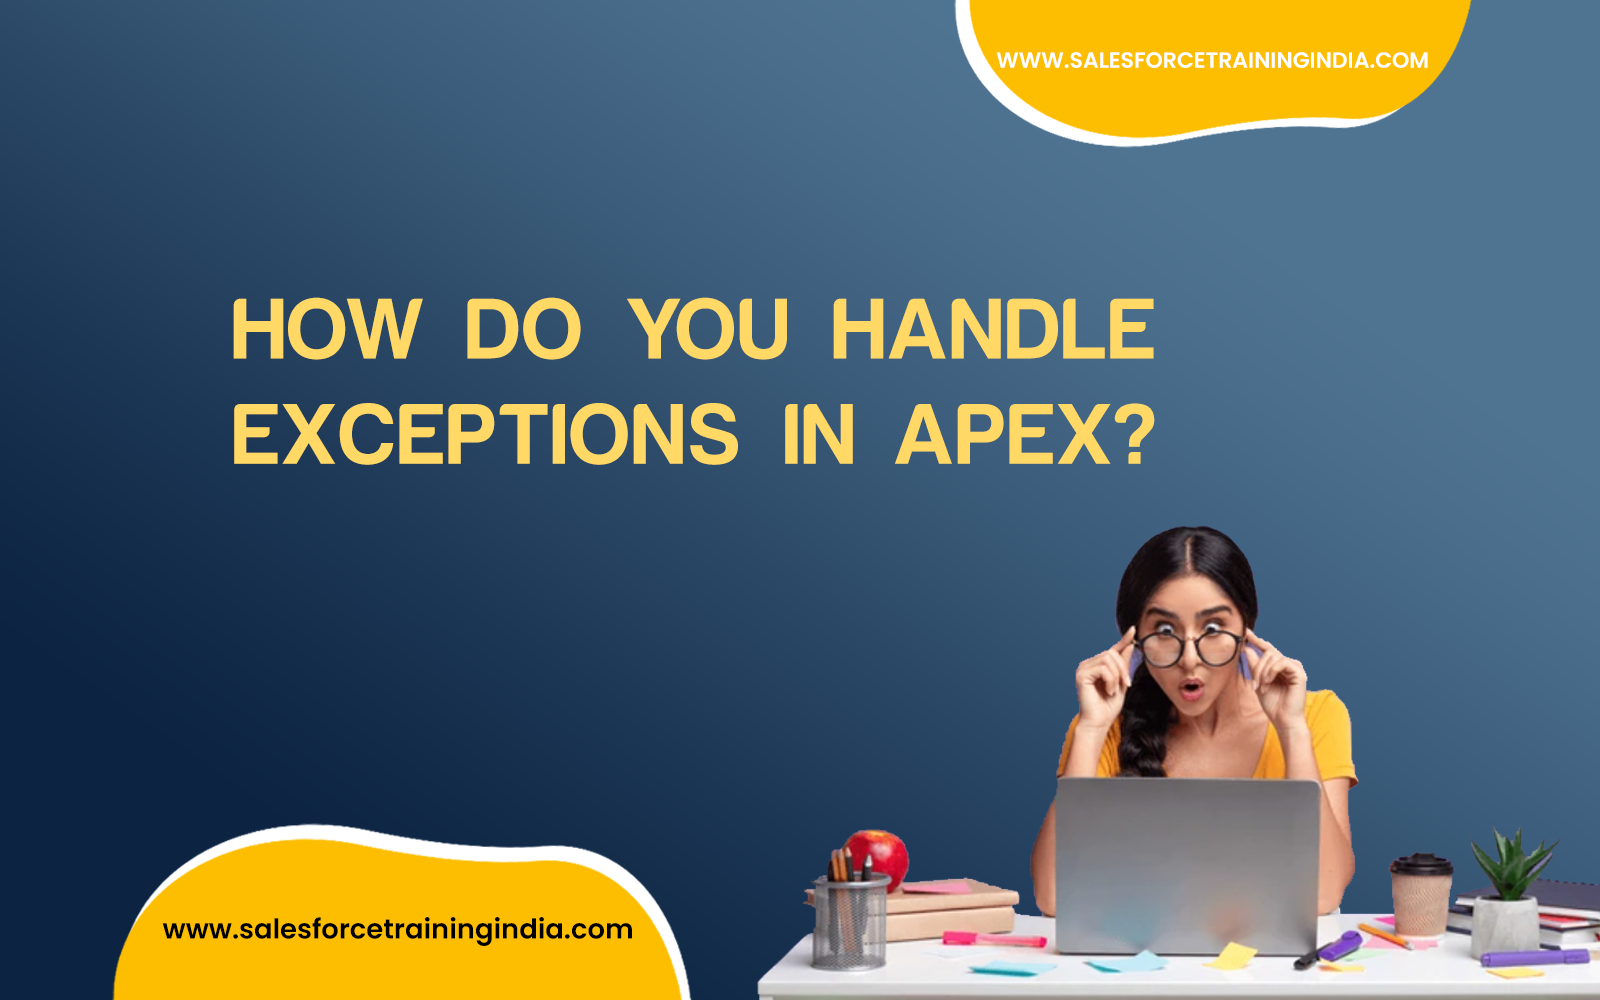 How do you handle exceptions in Apex?